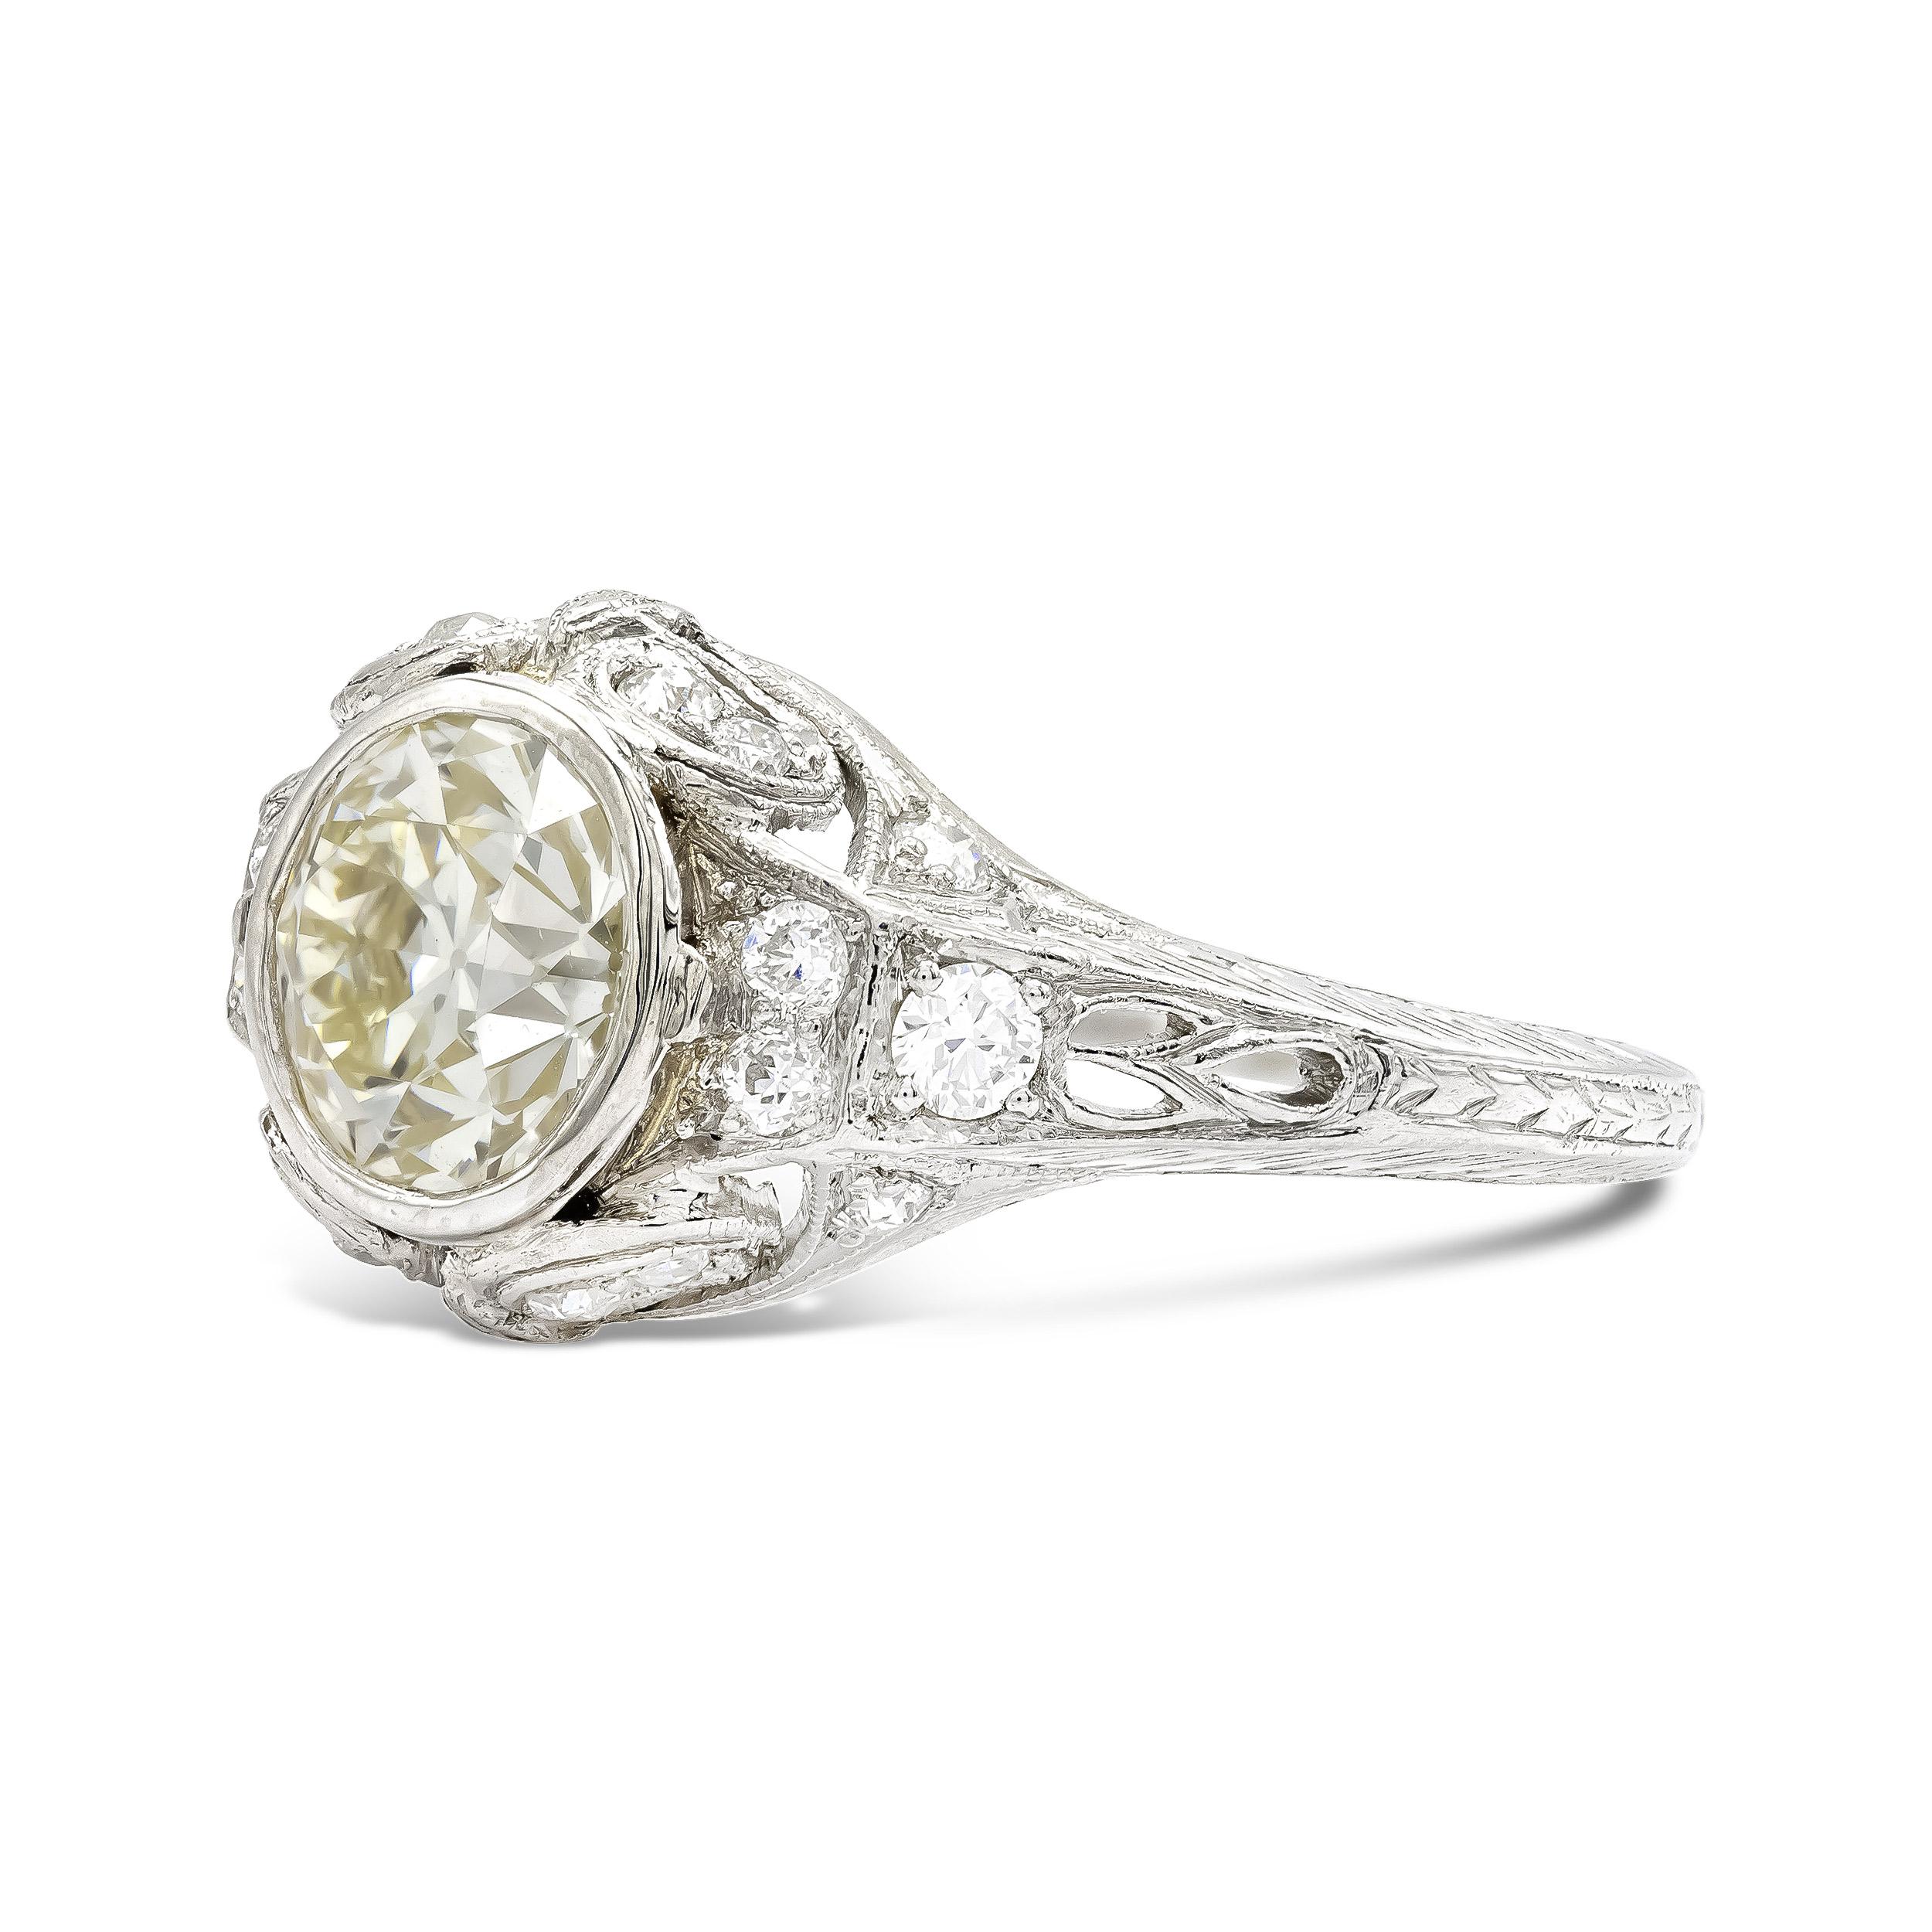 There is so much to love about this bold deco beauty. Centering the ring is a bezel-set old Euro that sparkles until tomorrow. At 1.50 carats, she is a vintage vision, boasting a beautiful facet pattern. Delicate hand-carved details complete the